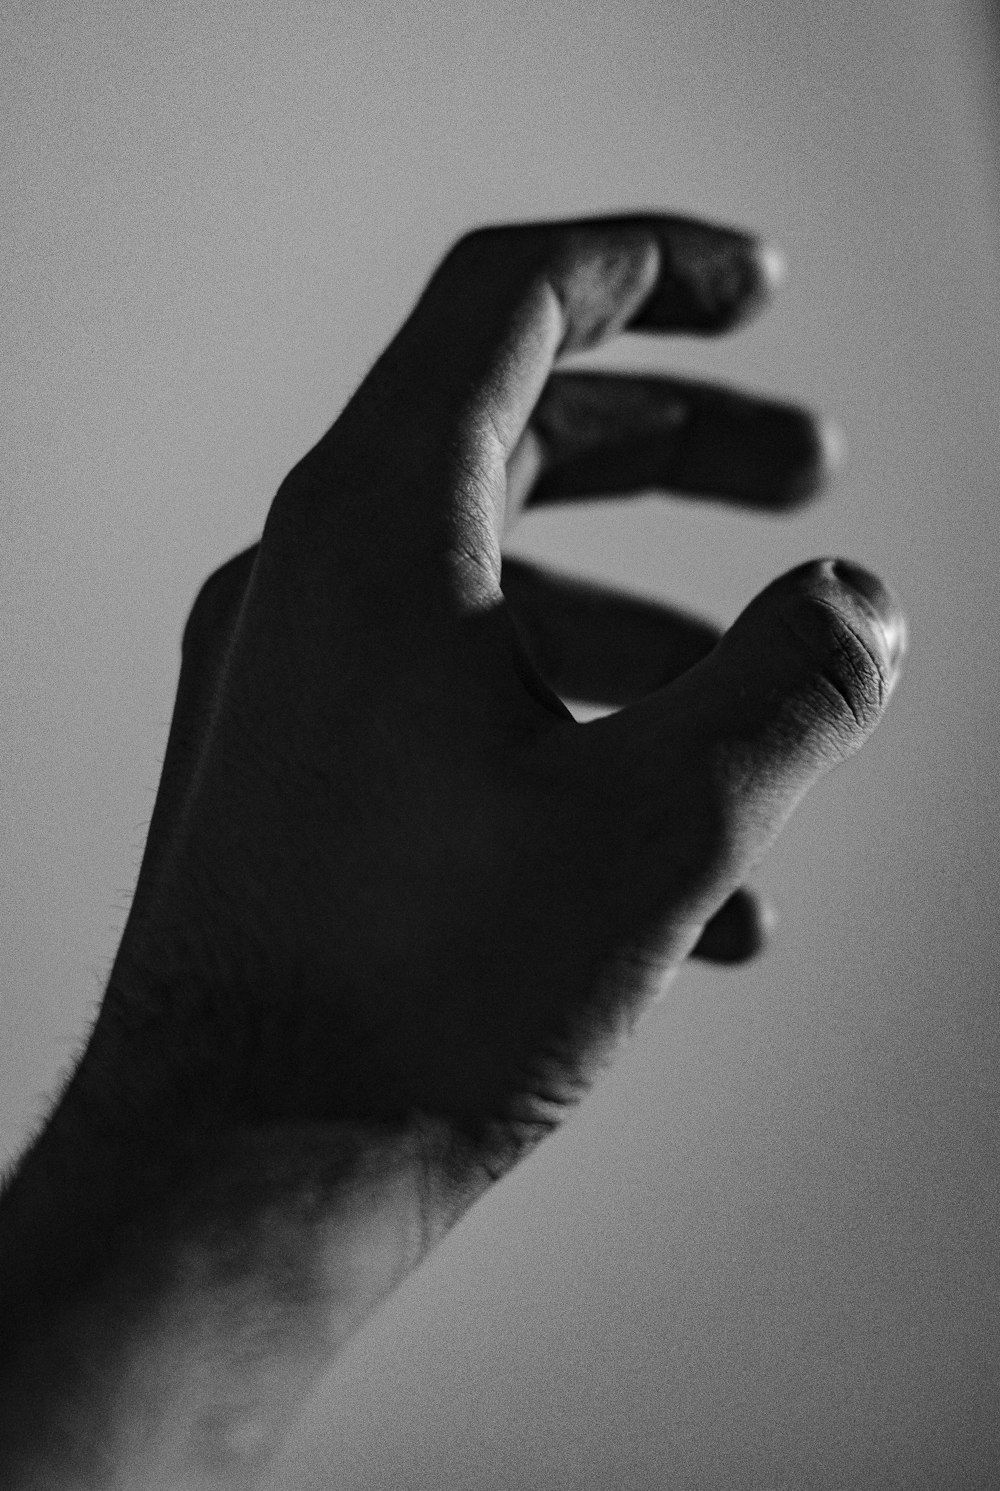 grayscale photography of left hand